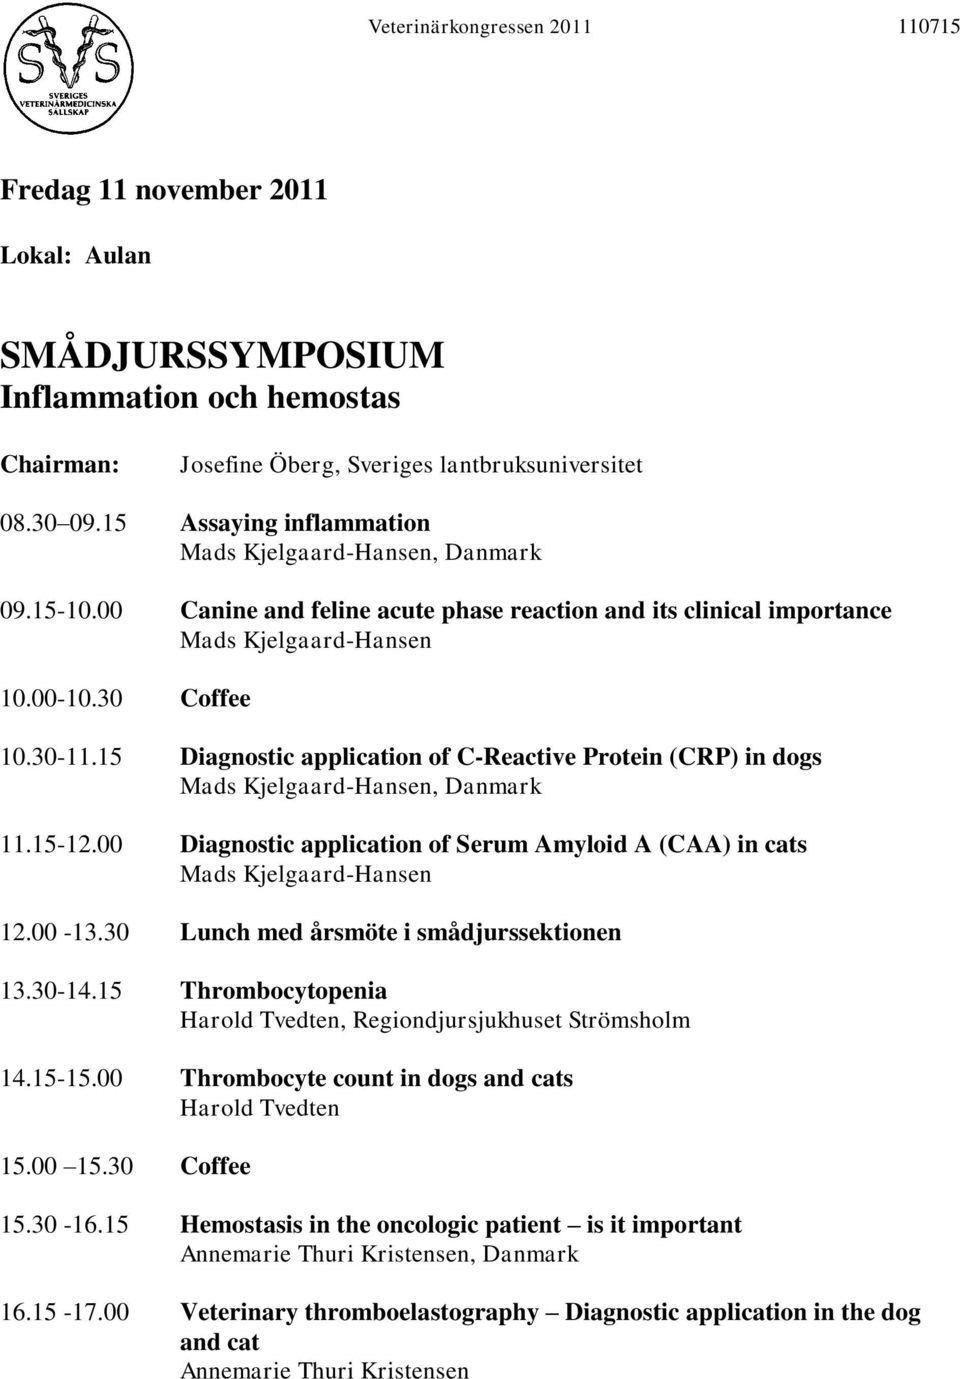 15 Diagnostic application of C-Reactive Protein (CRP) in dogs Mads Kjelgaard-Hansen, Danmark 11.15-12.00 Diagnostic application of Serum Amyloid A (CAA) in cats Mads Kjelgaard-Hansen 12.00-13.